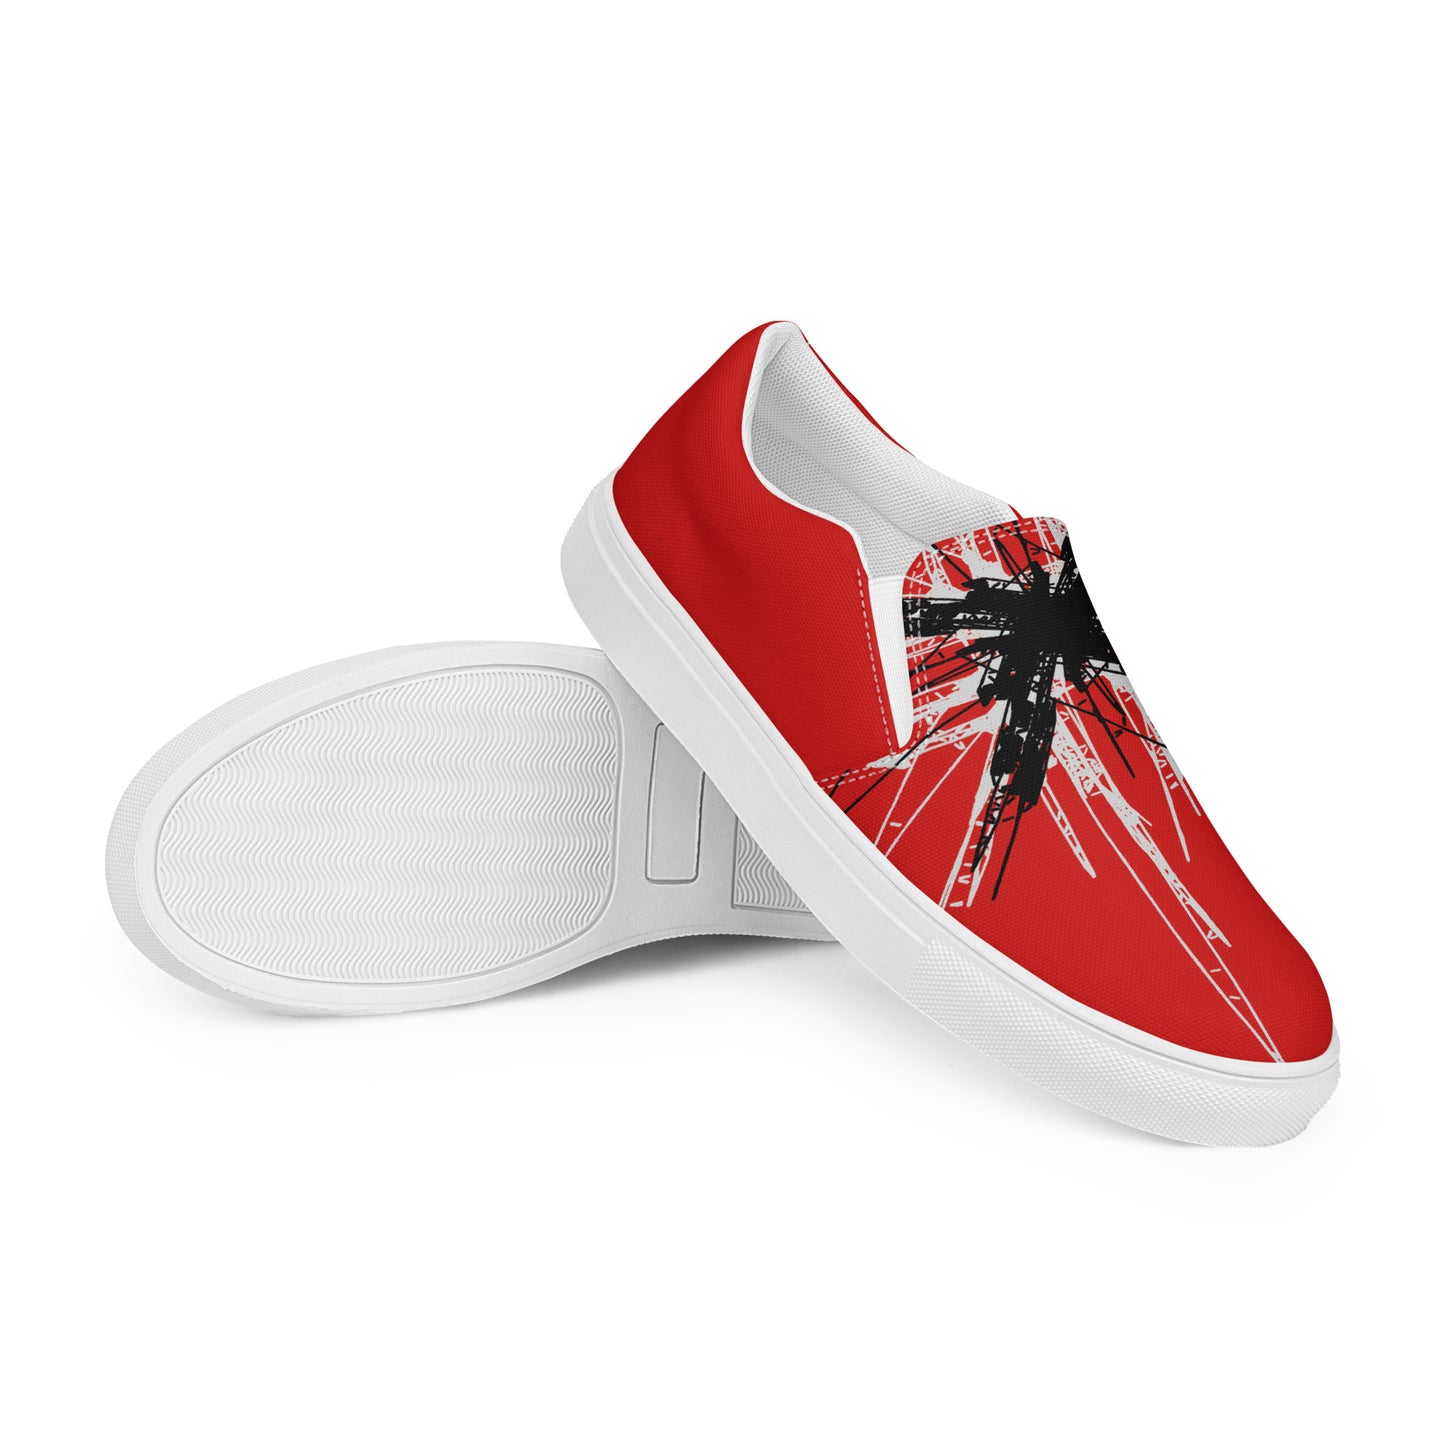 Abstract Men’s slip-on canvas shoes